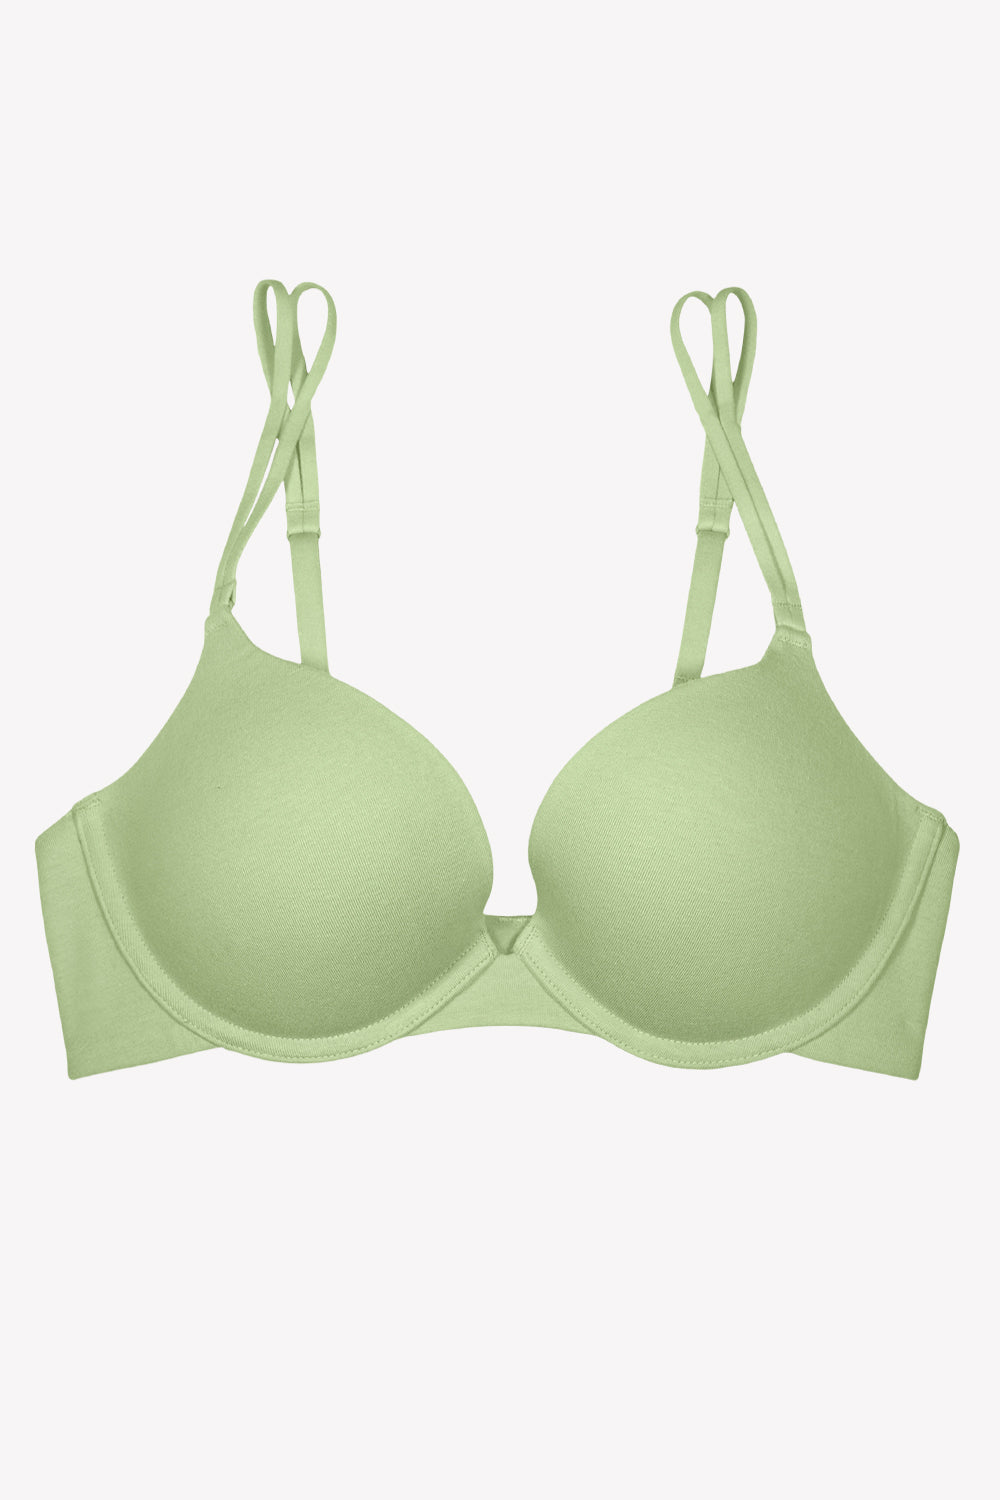 ZITIQUE Women's Full Cup Non-wired Push Up Bra - Green 2024